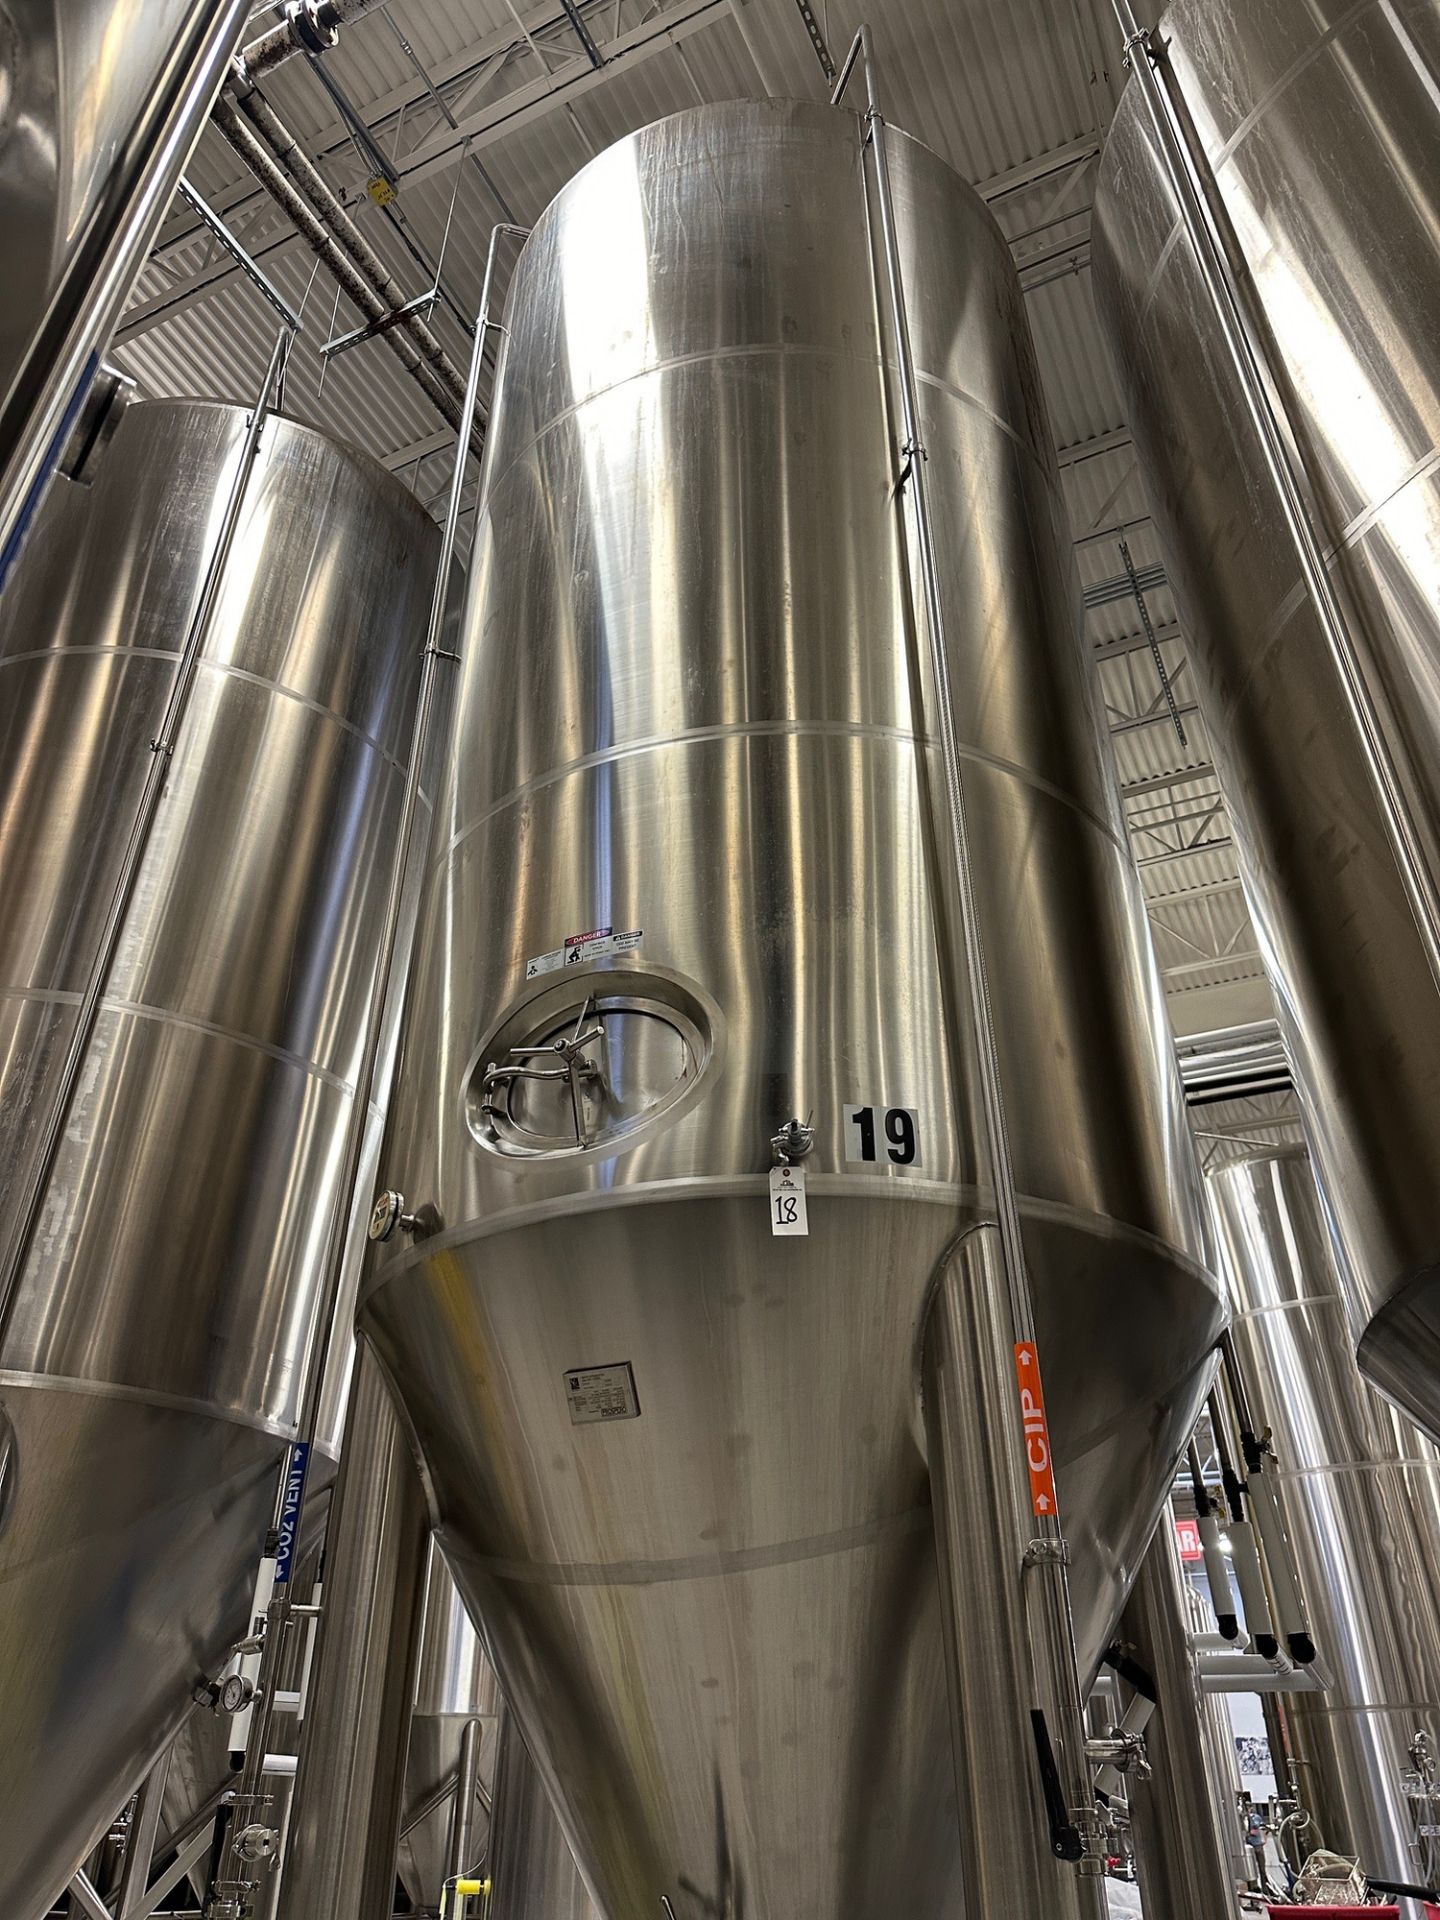 (1 of 2) 2018 Prospero 120 BBL FV / 148.6 BBL or 4,600 Gal Max Capacity Jacketed Stainless Steel FV